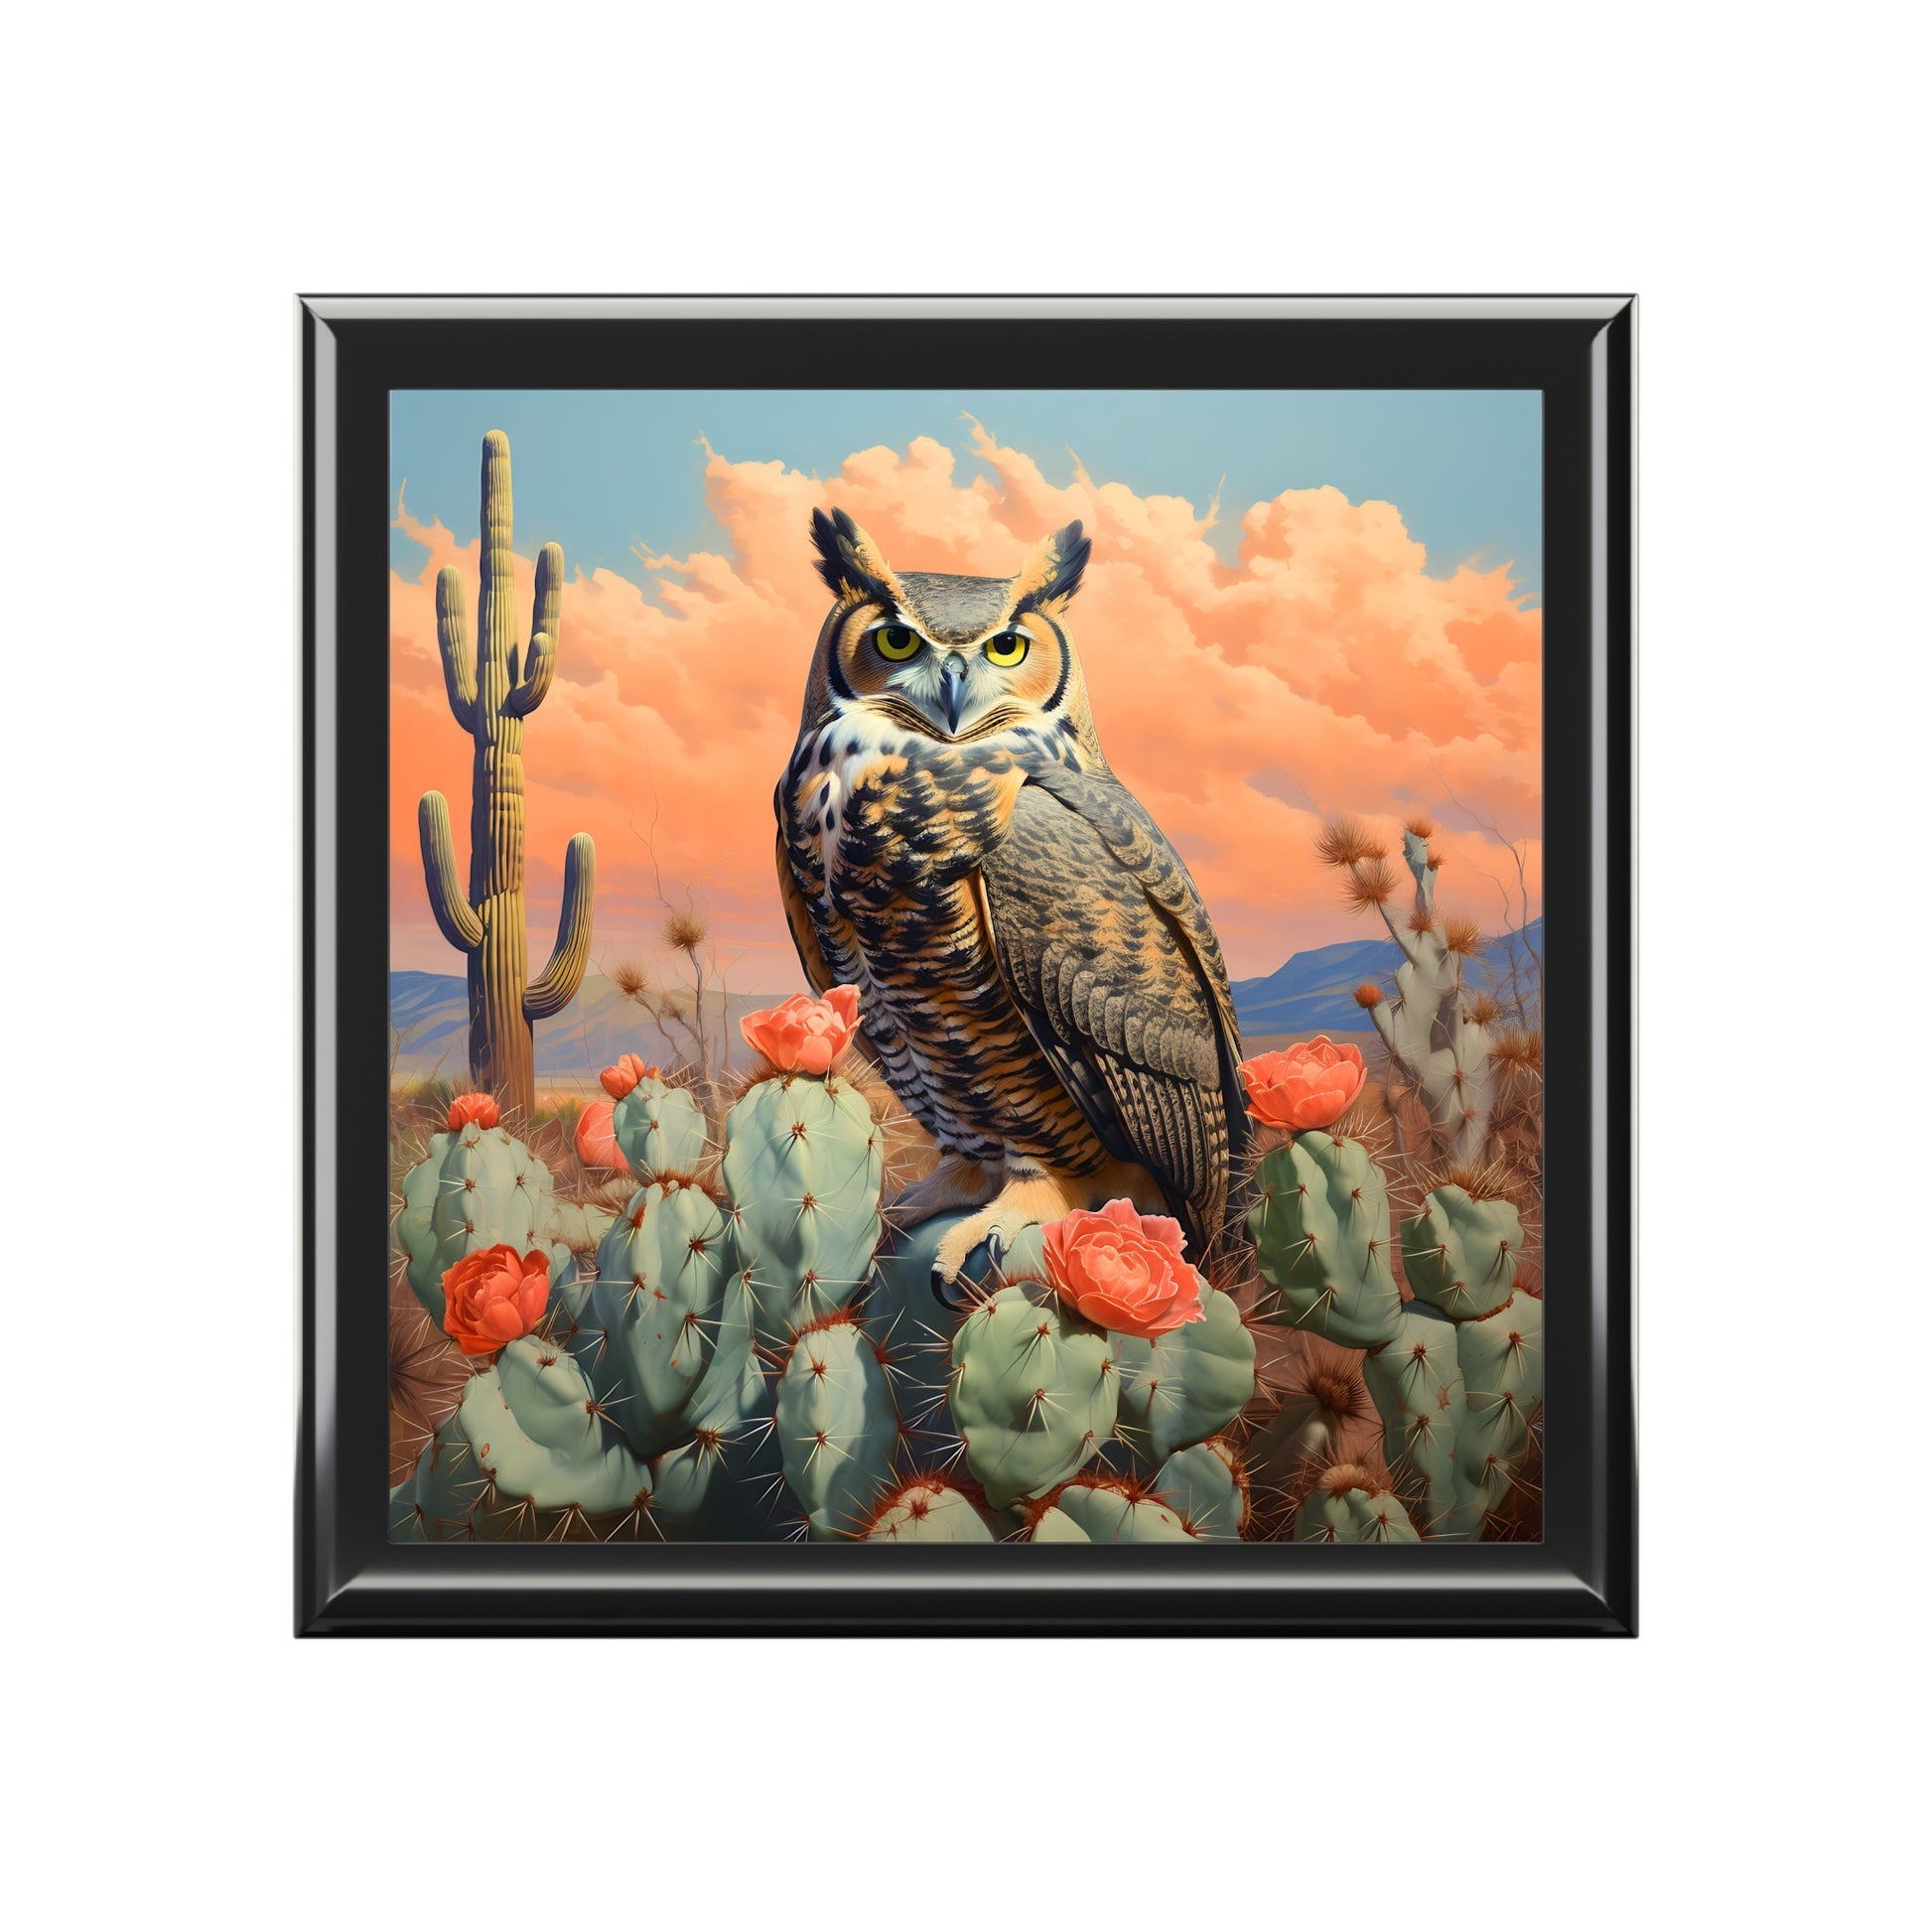 Great Hprned Owl on Stormy Day in Cactus Desert Art Print Gift and Jewelry Box